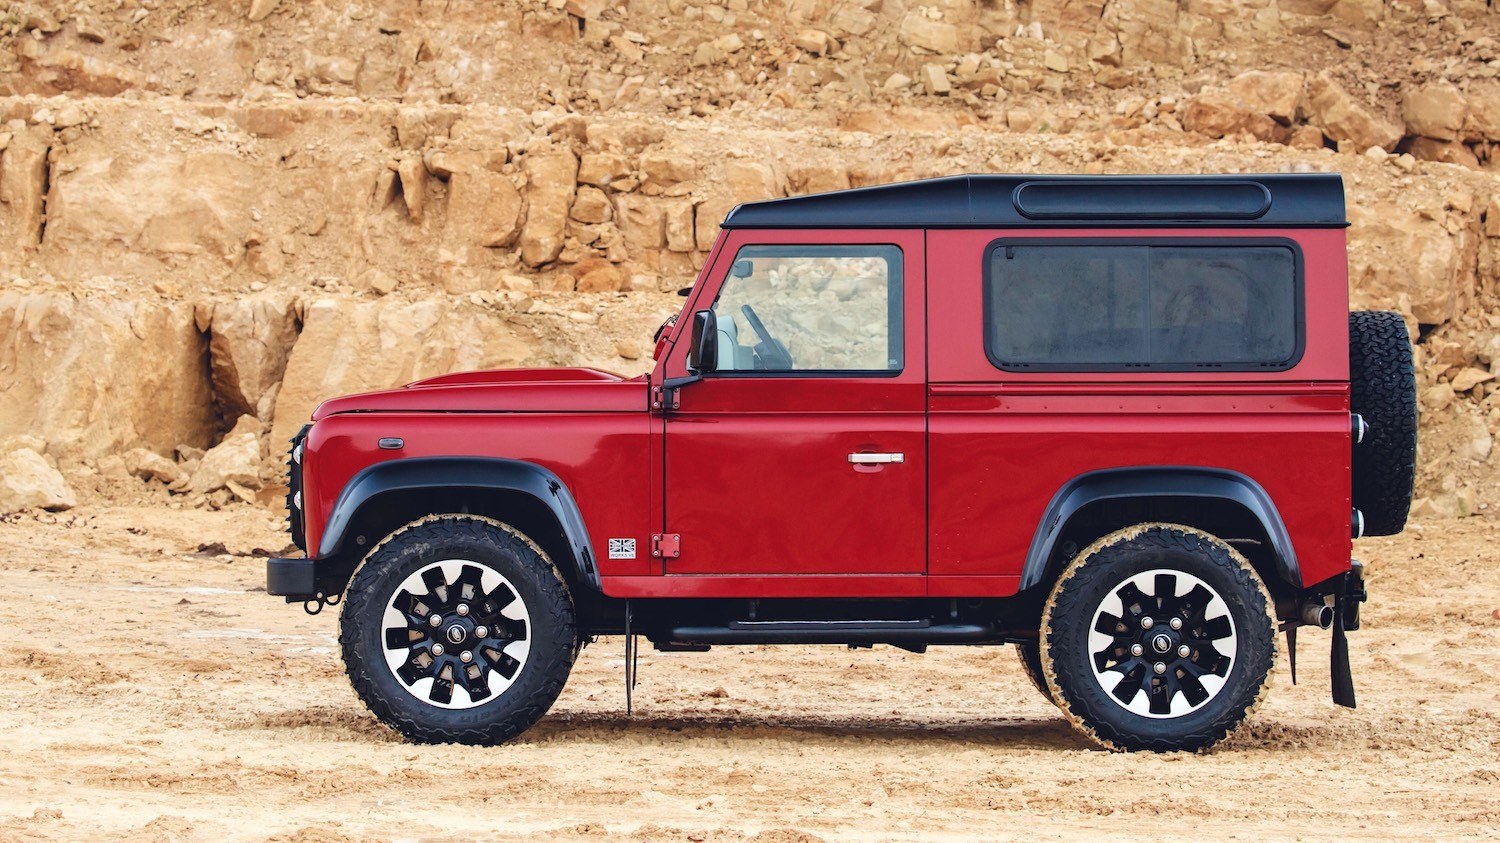 The latest 70th Edition Defender for the JPR 2018 70th Anniversary Celebrations 18